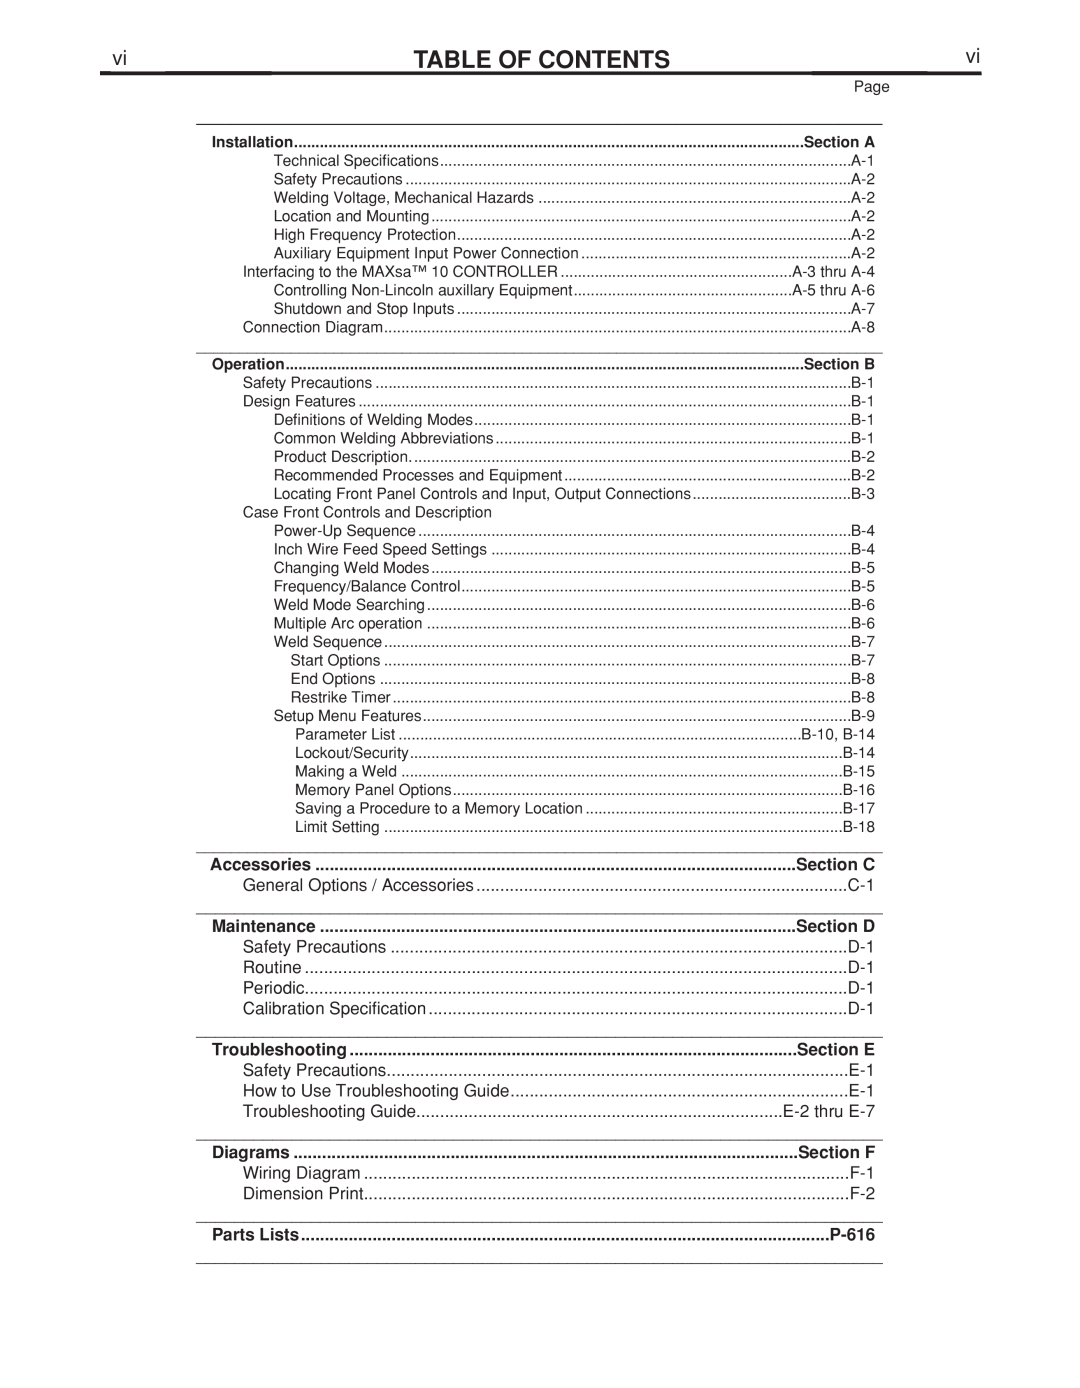 Lincoln Electric IM10023 manual Table Of Contents, Section C, Section D, Section E, Section F, P-616 